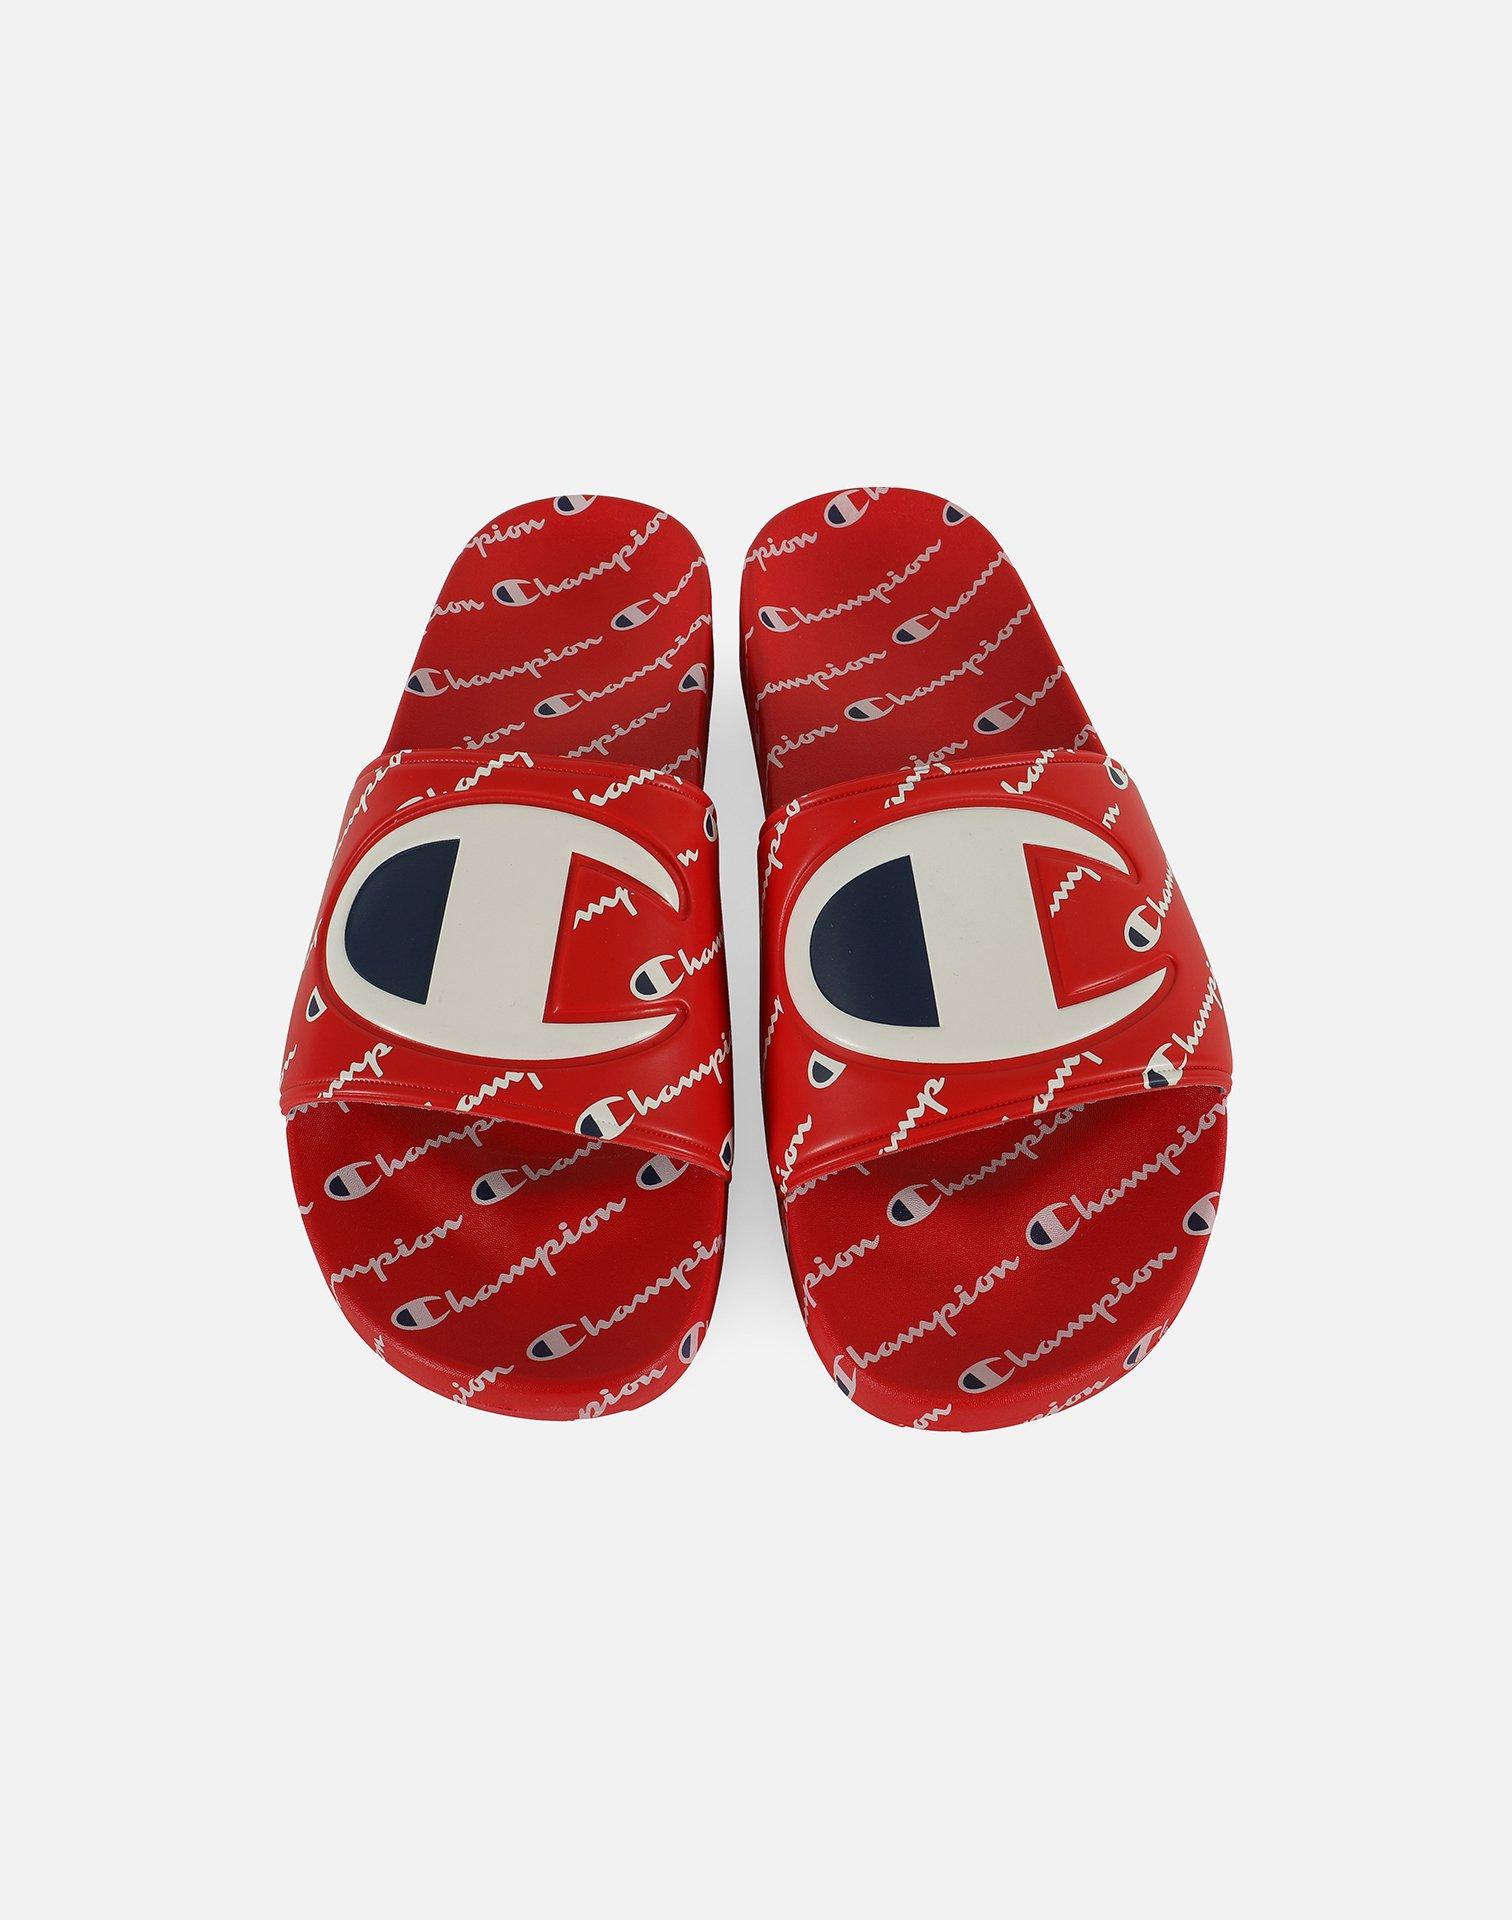 Champion Ipo Repeat Slides in Red for Men - Lyst